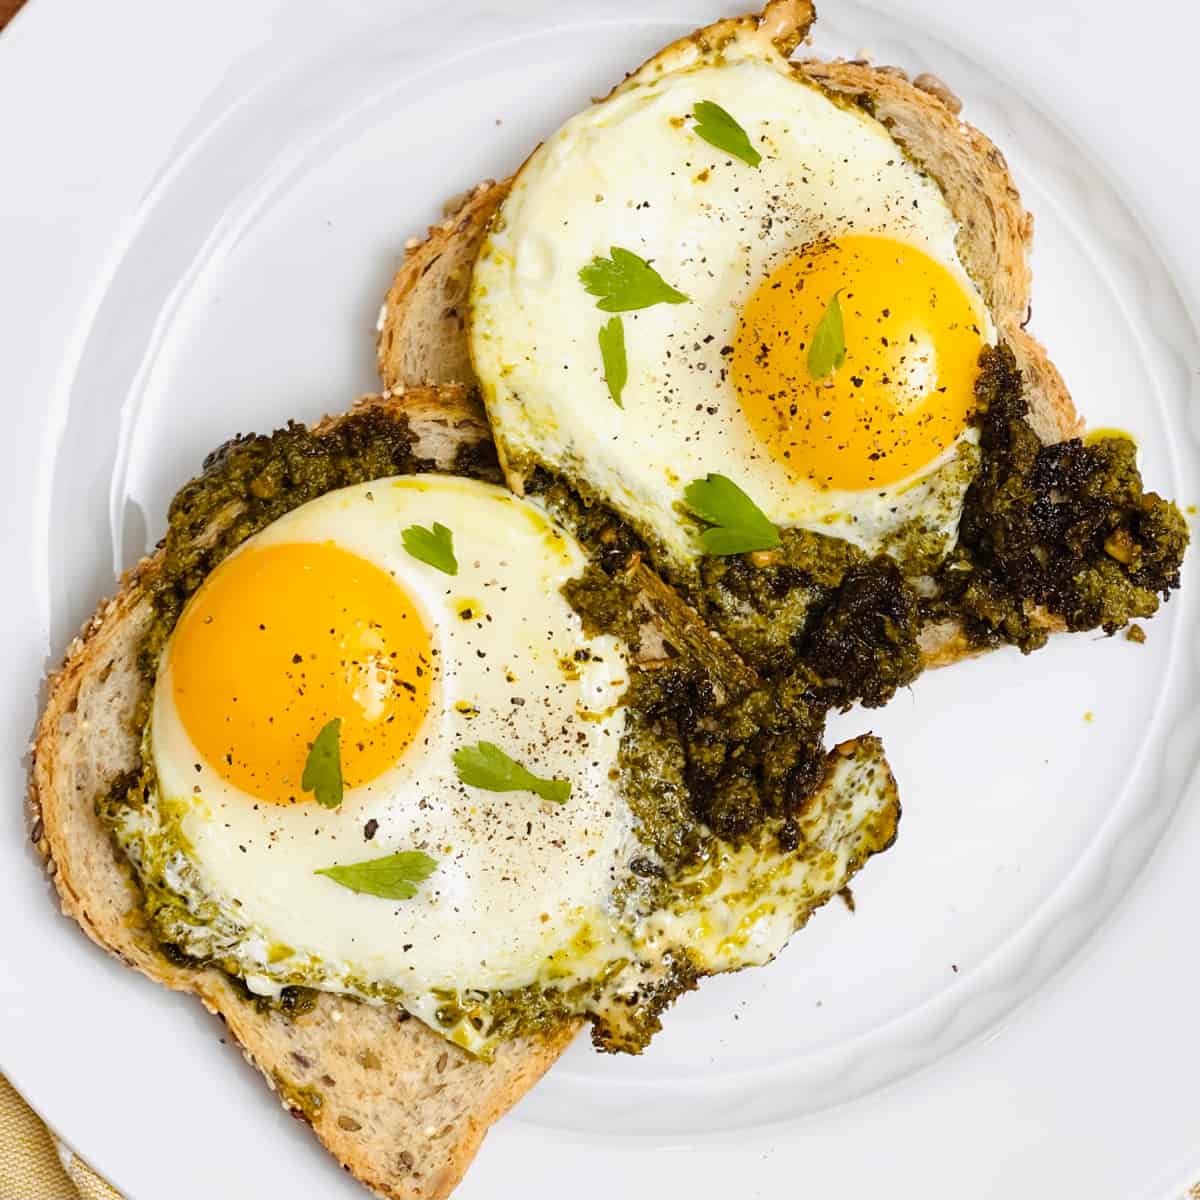 We Tried The Pesto Eggs Everyone On The Internet Is Raving About